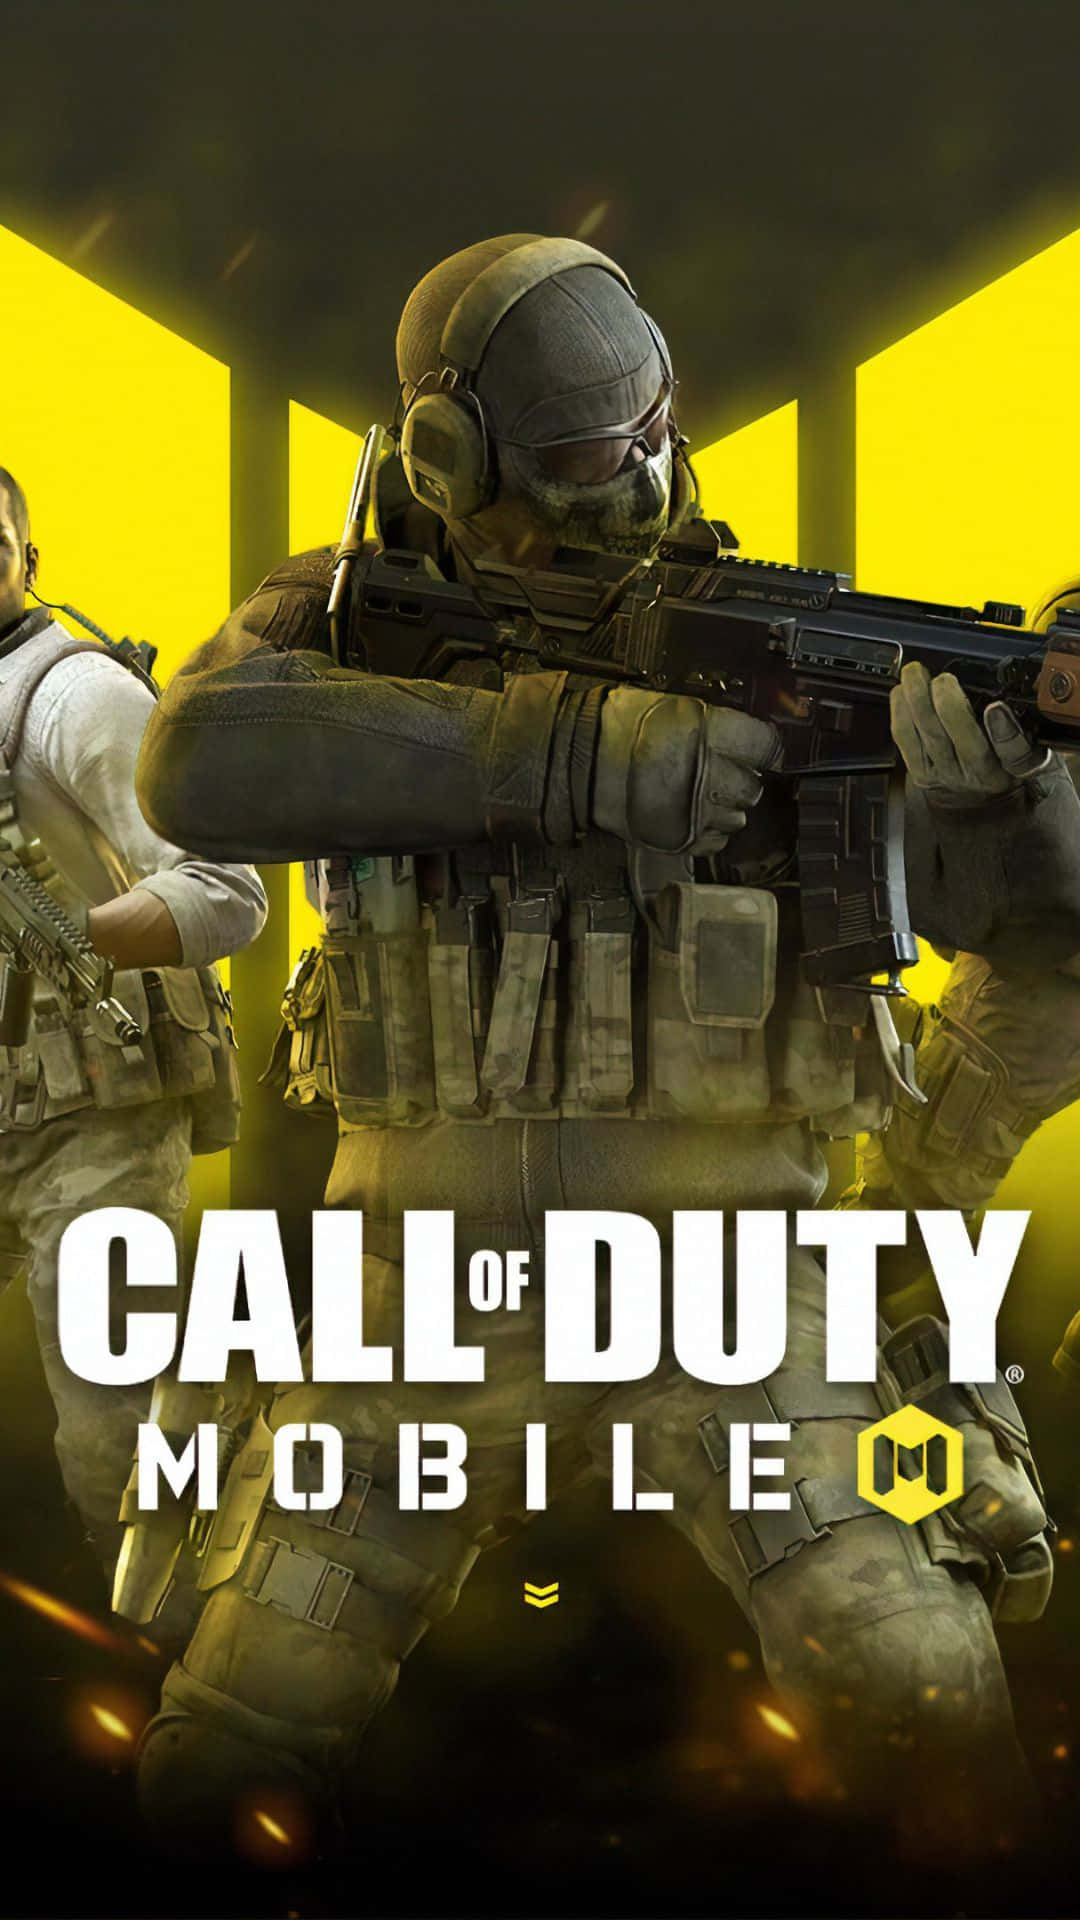 Erlebedas Ultimative Actionerlebnis In Call Of Duty Mobile.